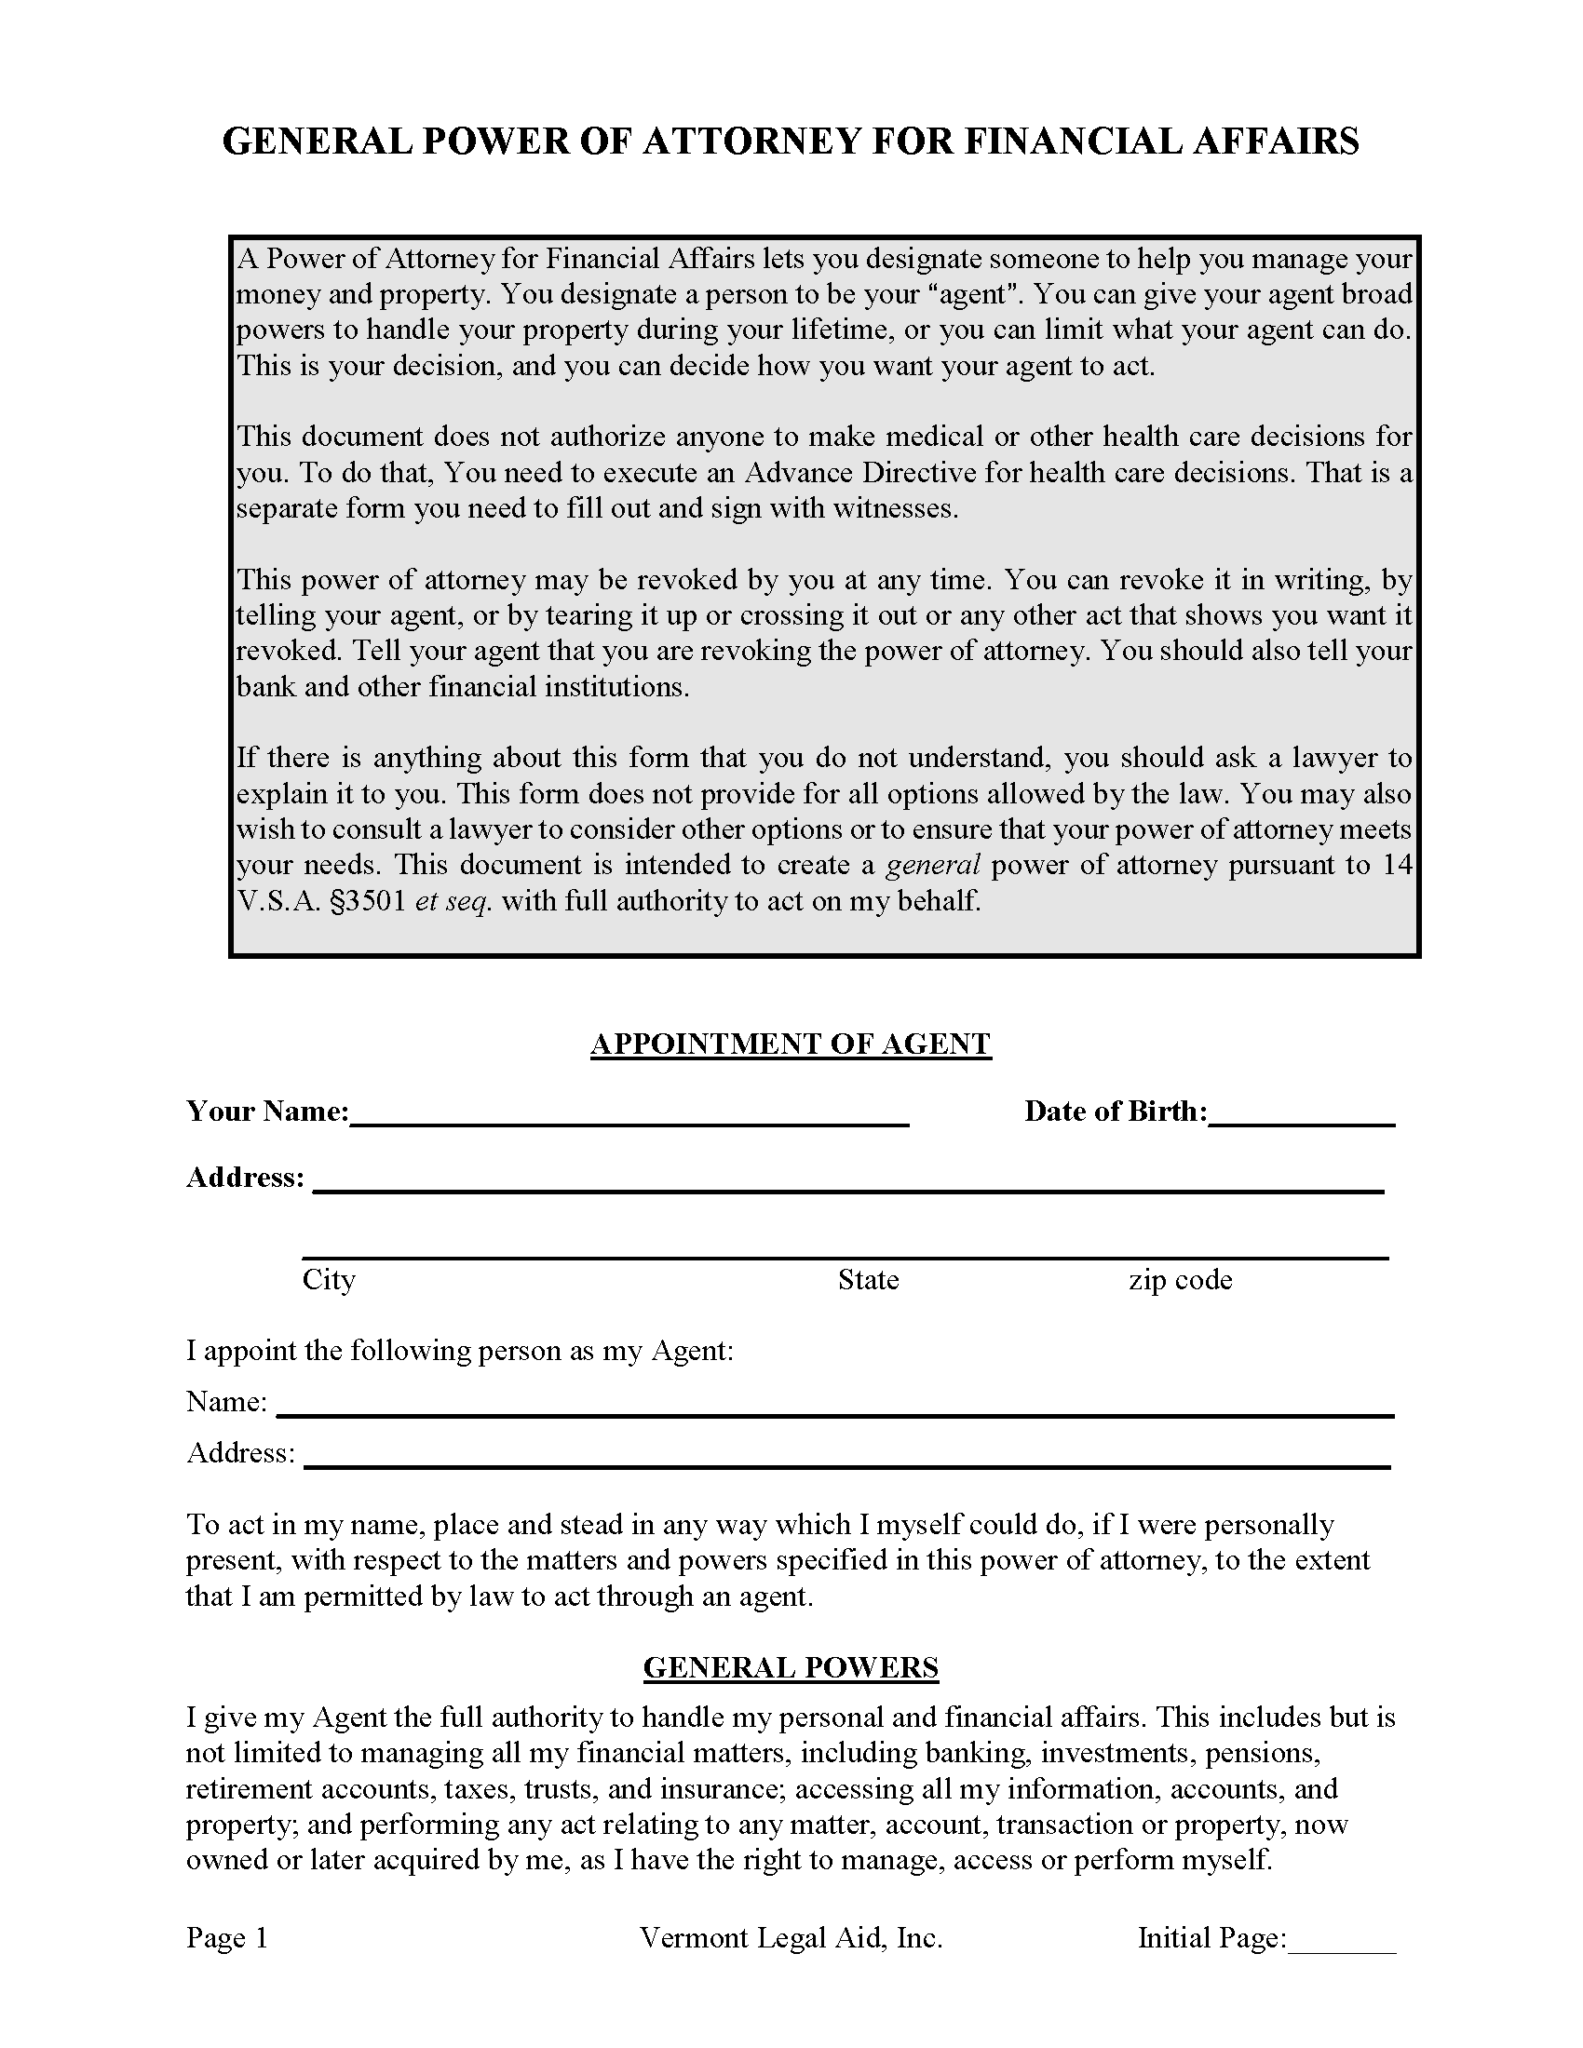 free-vermont-general-power-of-attorney-form-pdf-word